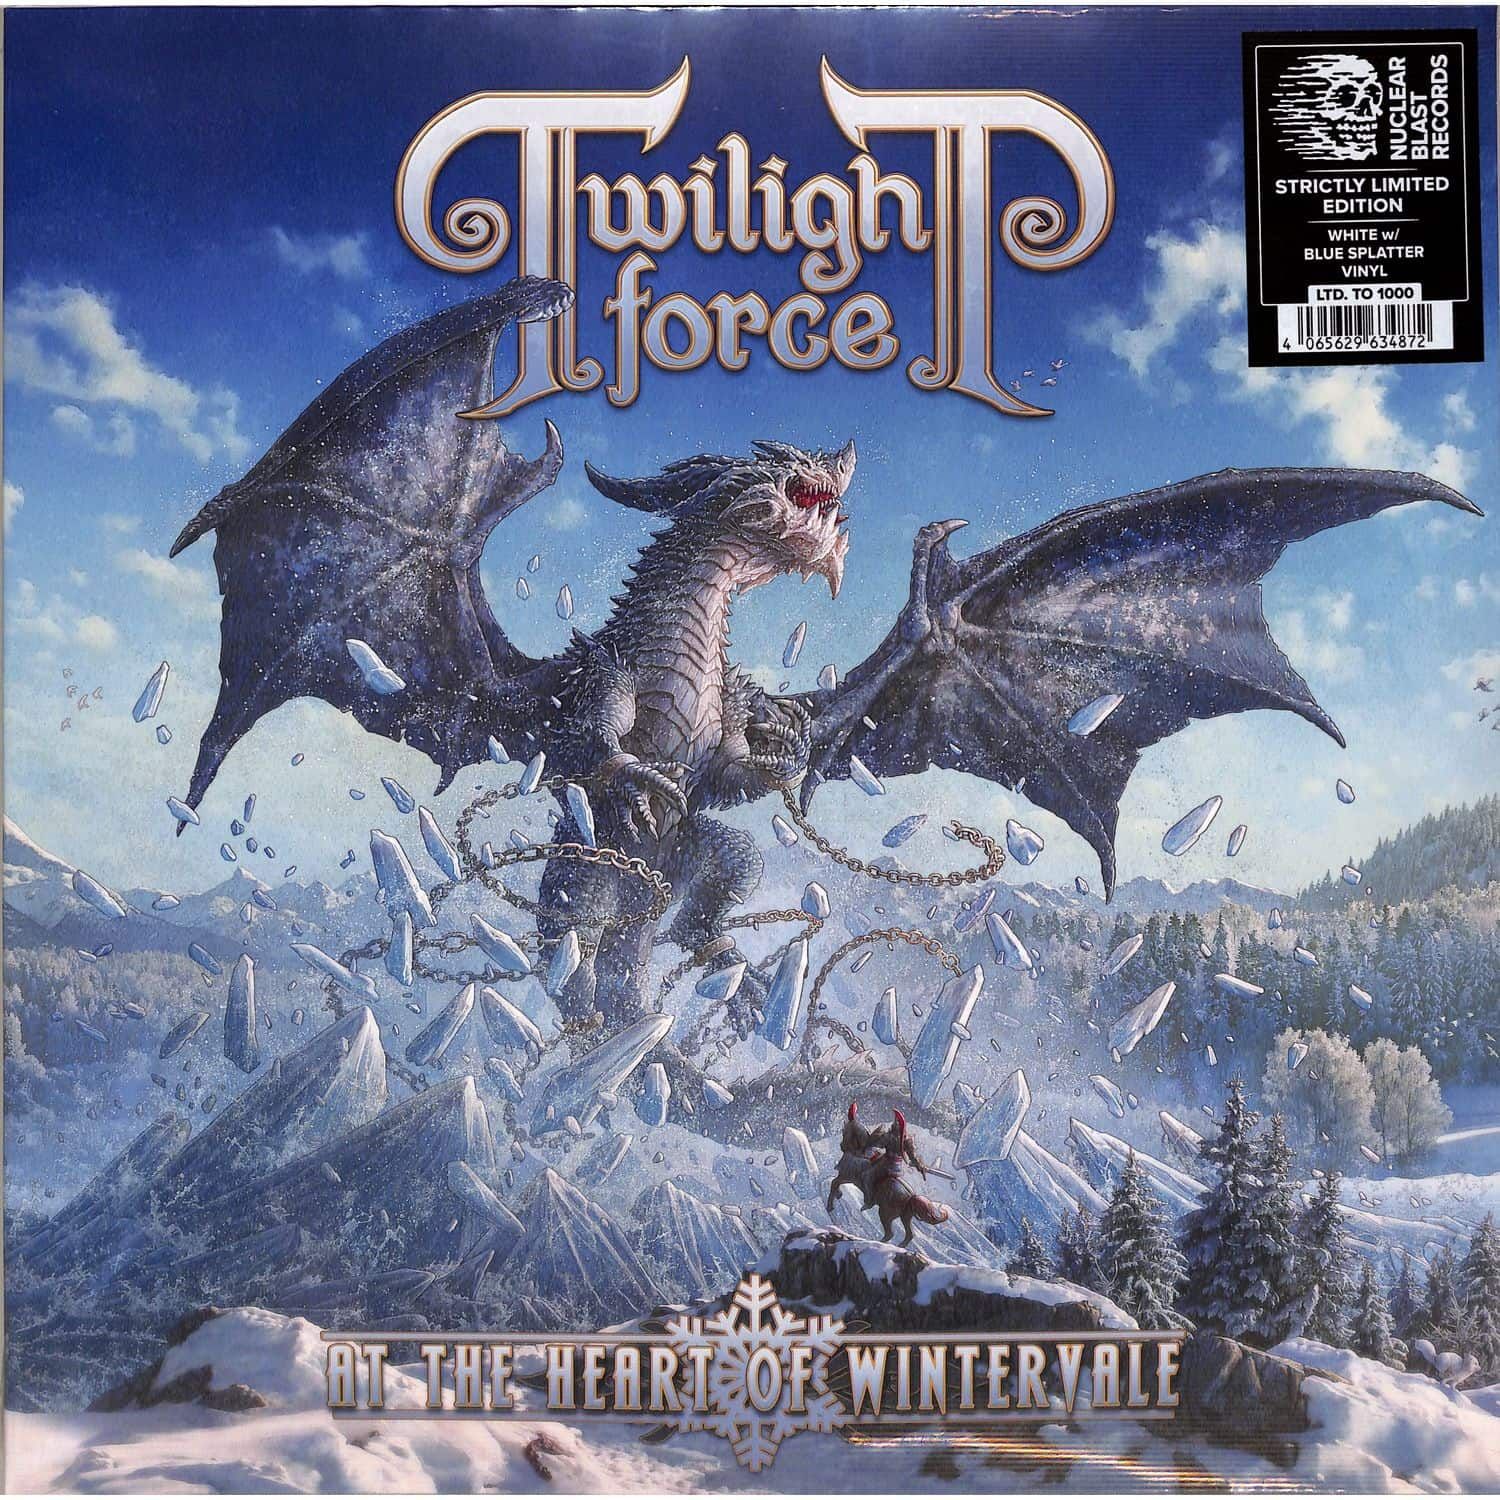 4065629634872, Виниловая пластинка Twilight Force, At The Heart Of Wintervale (coloured) 0819514011903 виниловая пластинка coryell larry at montreux coloured